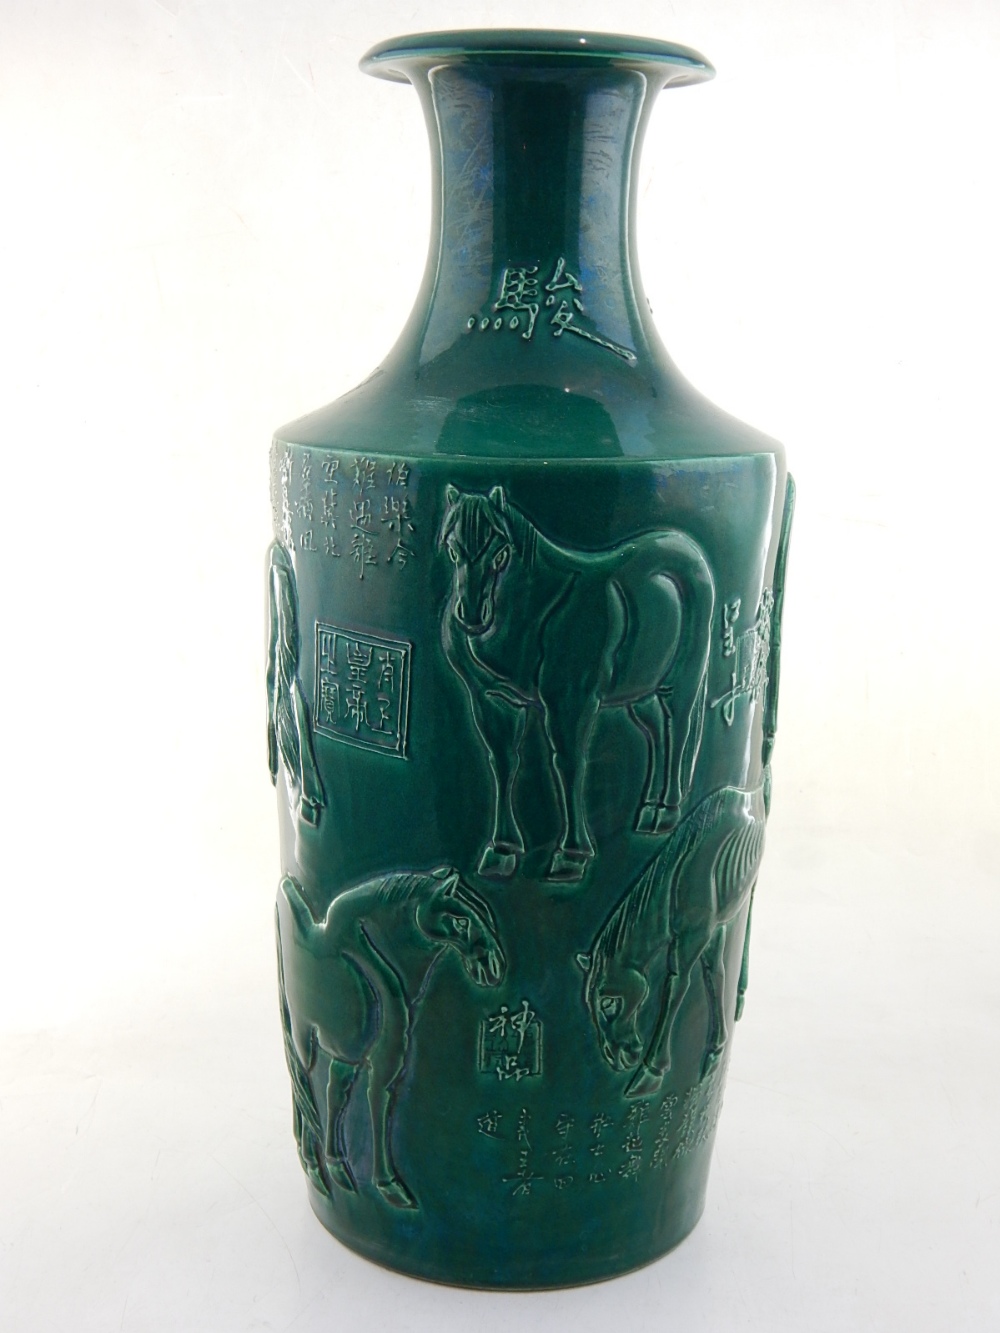 A Chinese green glazed porcelain vase, the body moulded with horses and script, H. 47cm. - Image 14 of 14